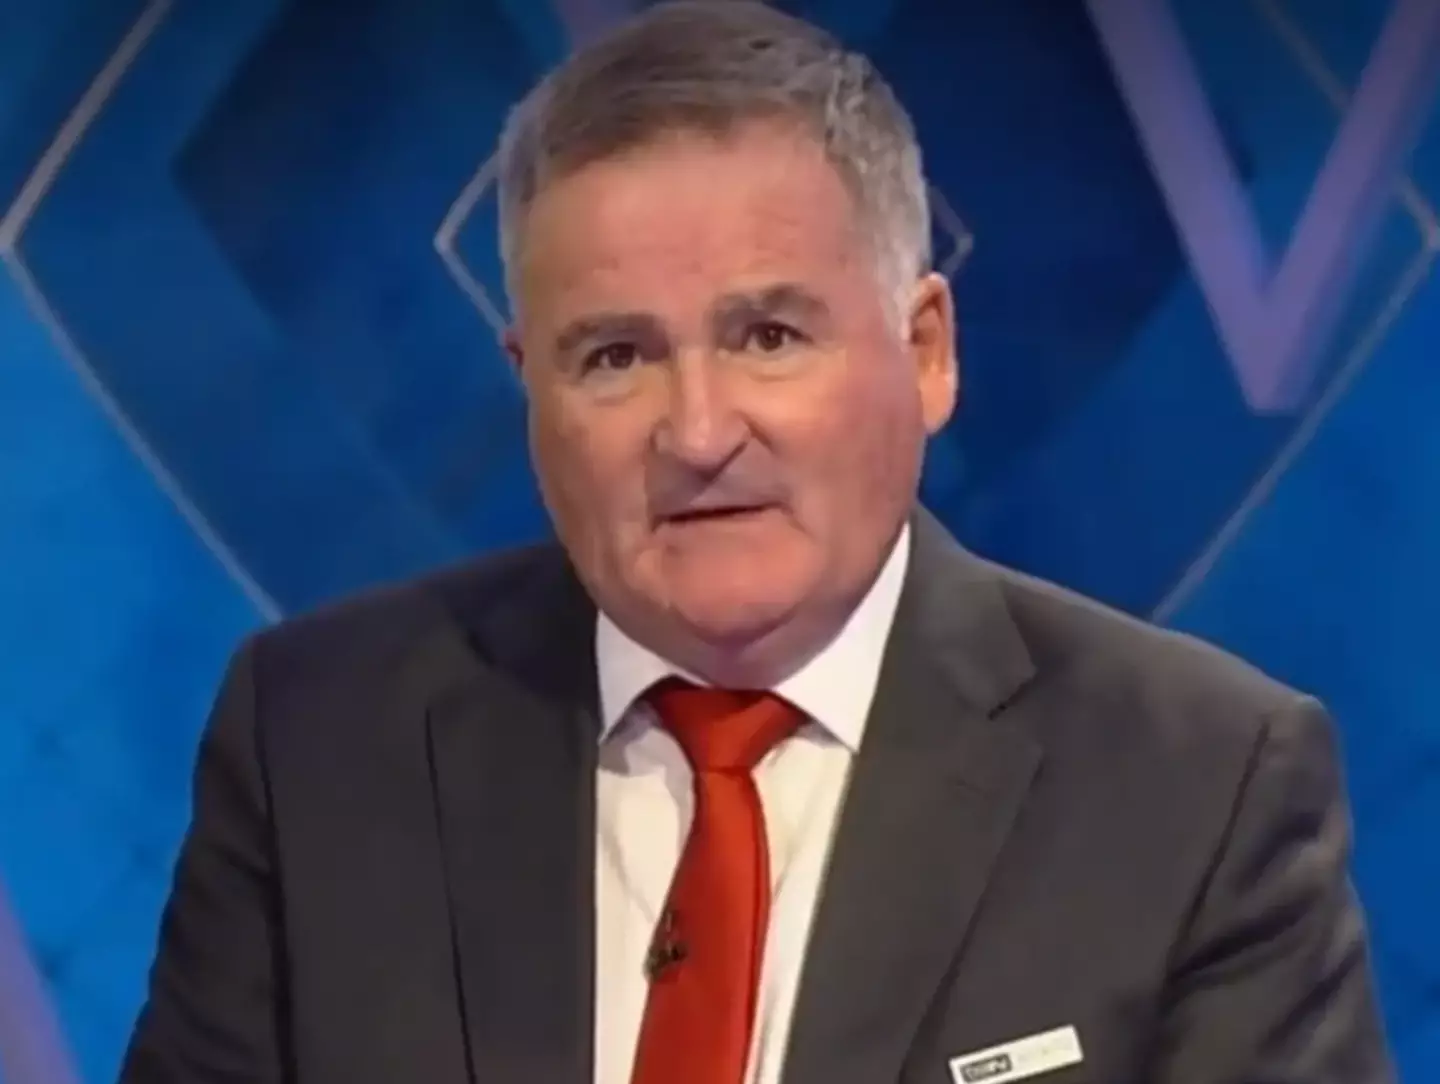 Richard Keys previously worked for Sky Sports.